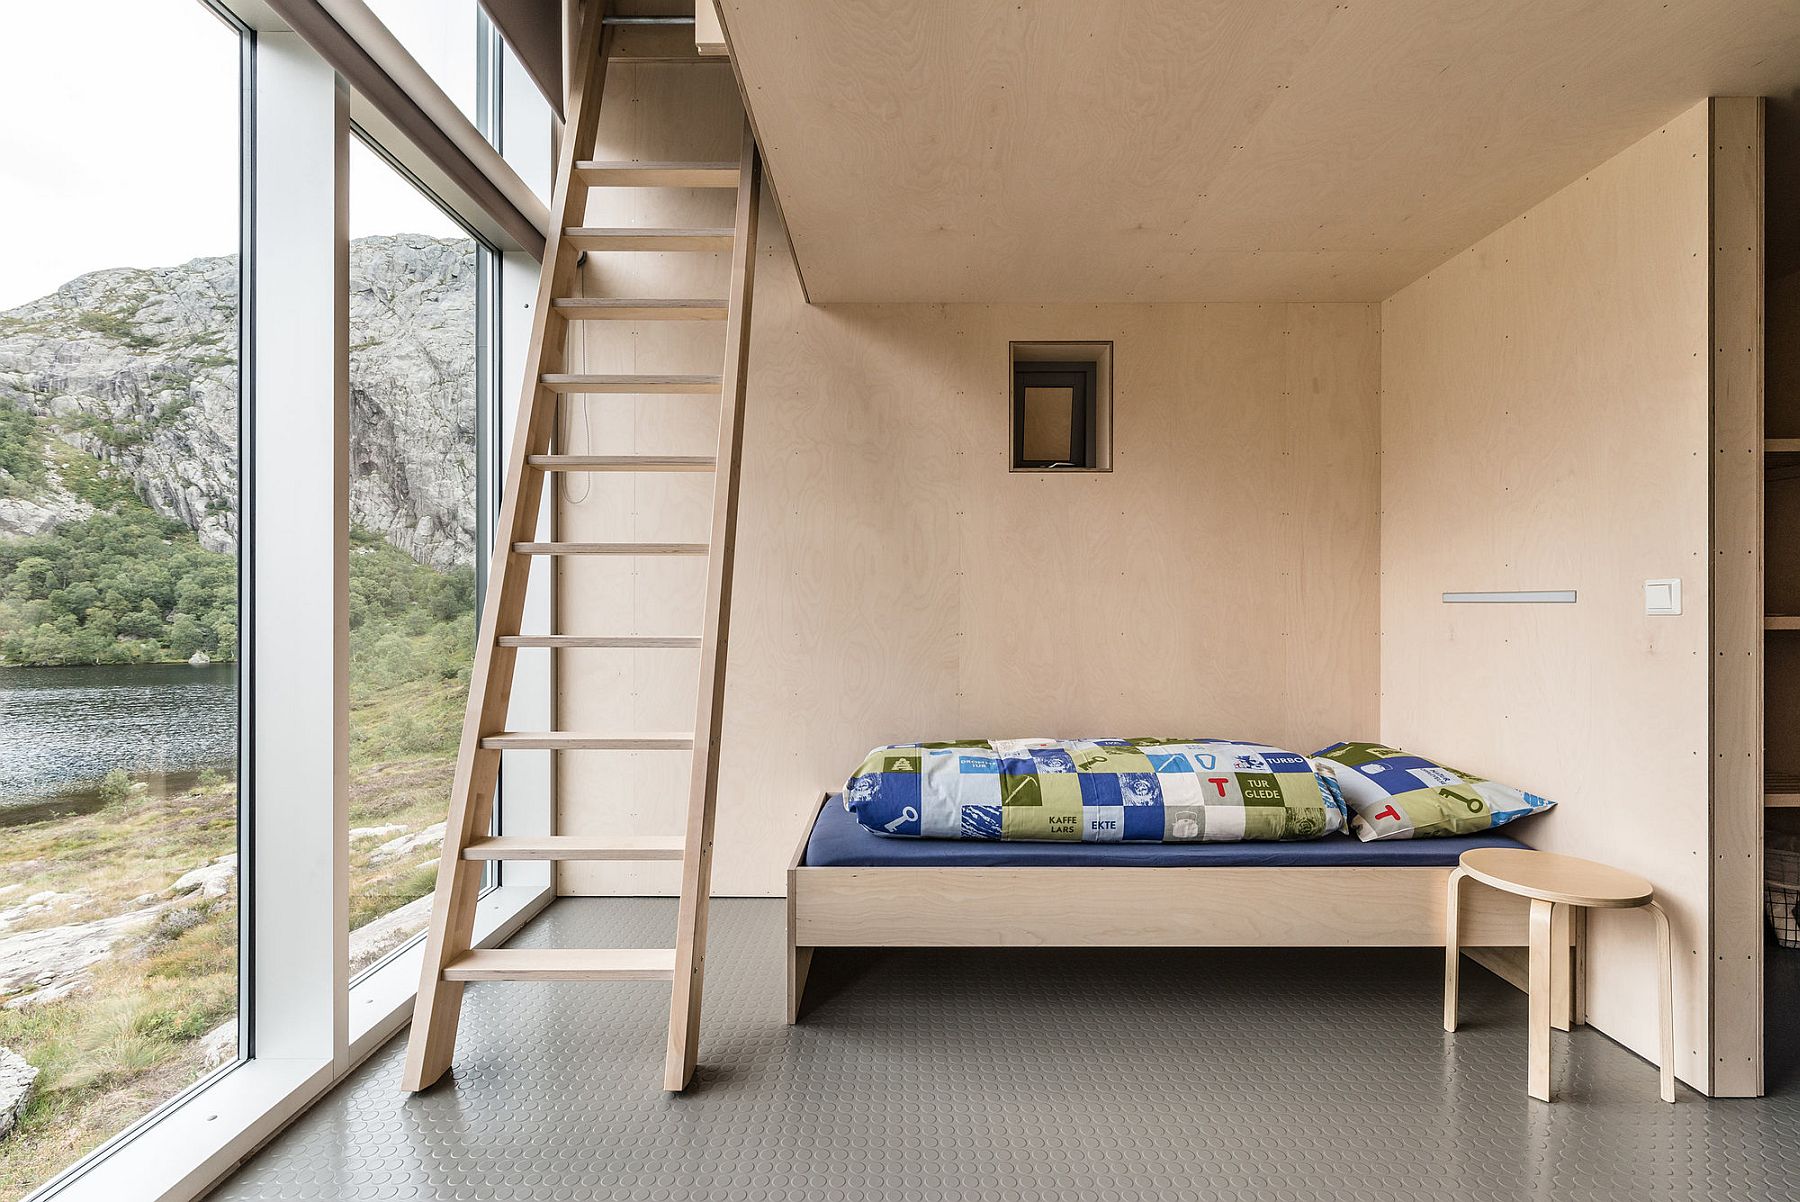 Bunk beds create perfect and multiple sleeping stations inside the mountain cabin